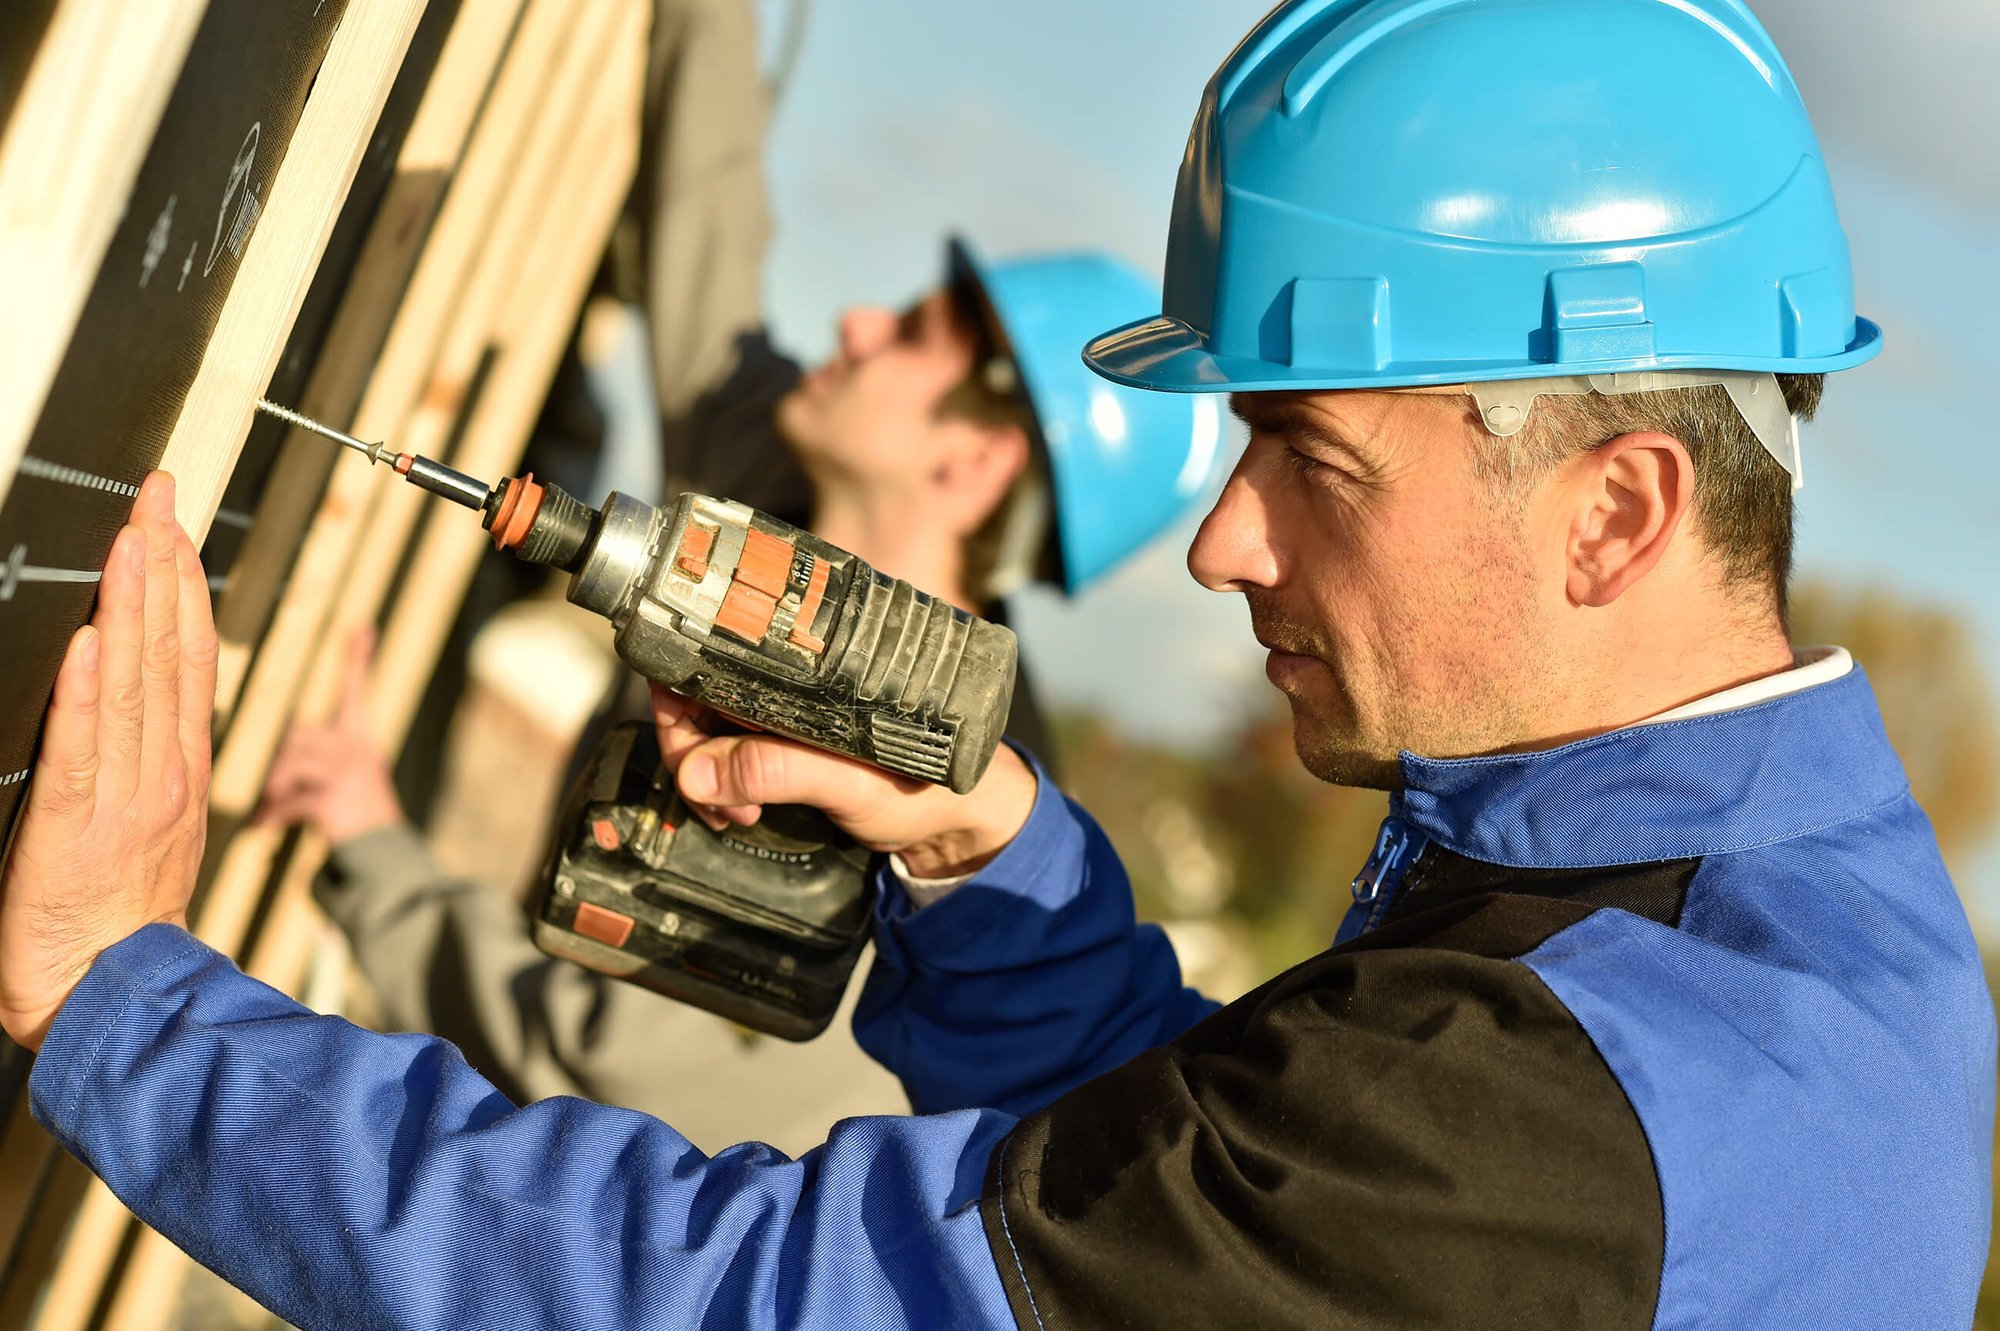 Male construction worker wearing a blue hard hat and vest drilling into wood at an exterior construction site.